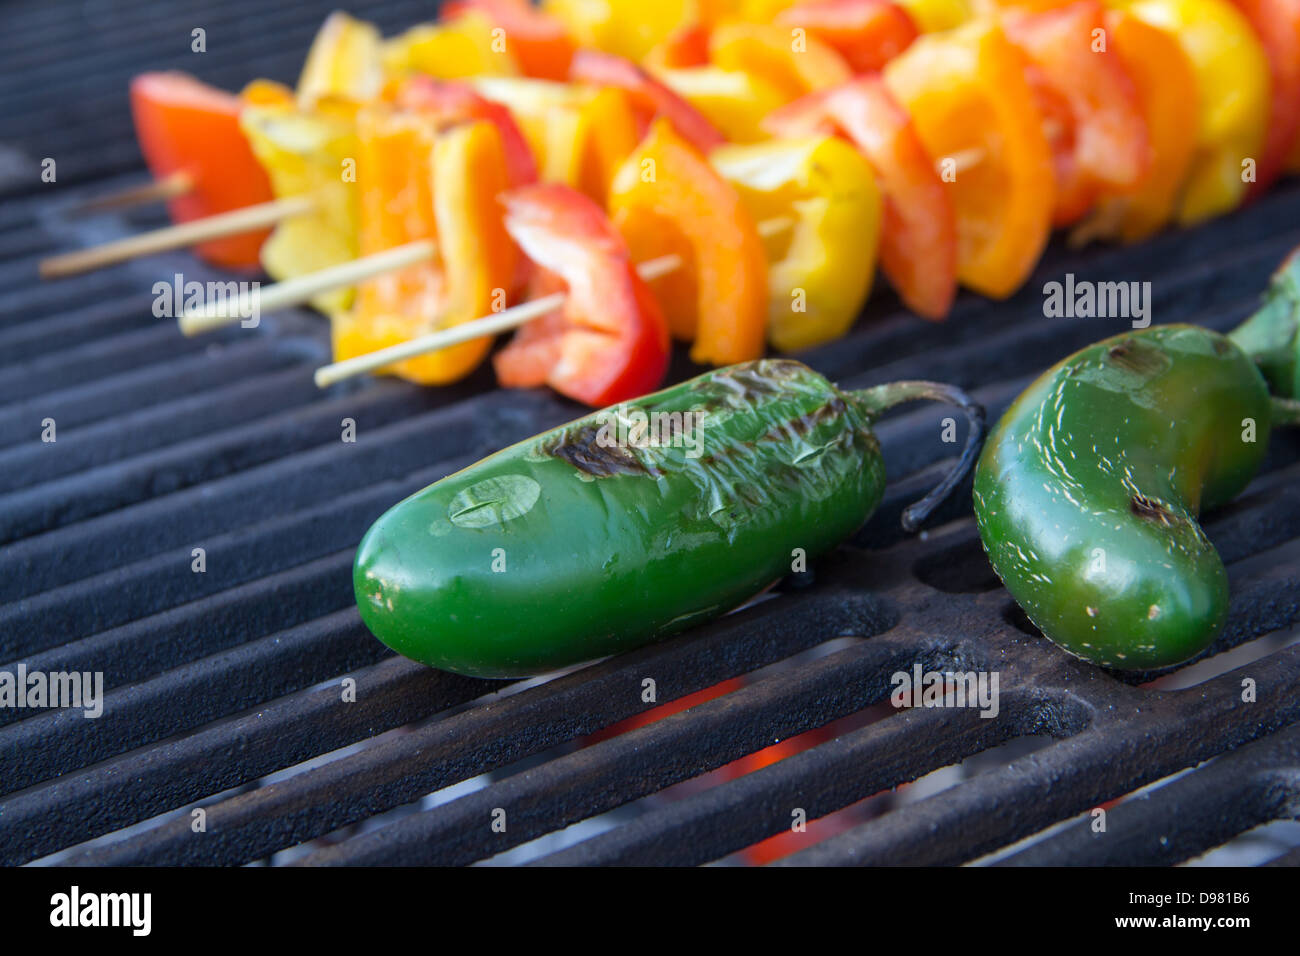 Grilled jalapeños on a grill Stock Photo